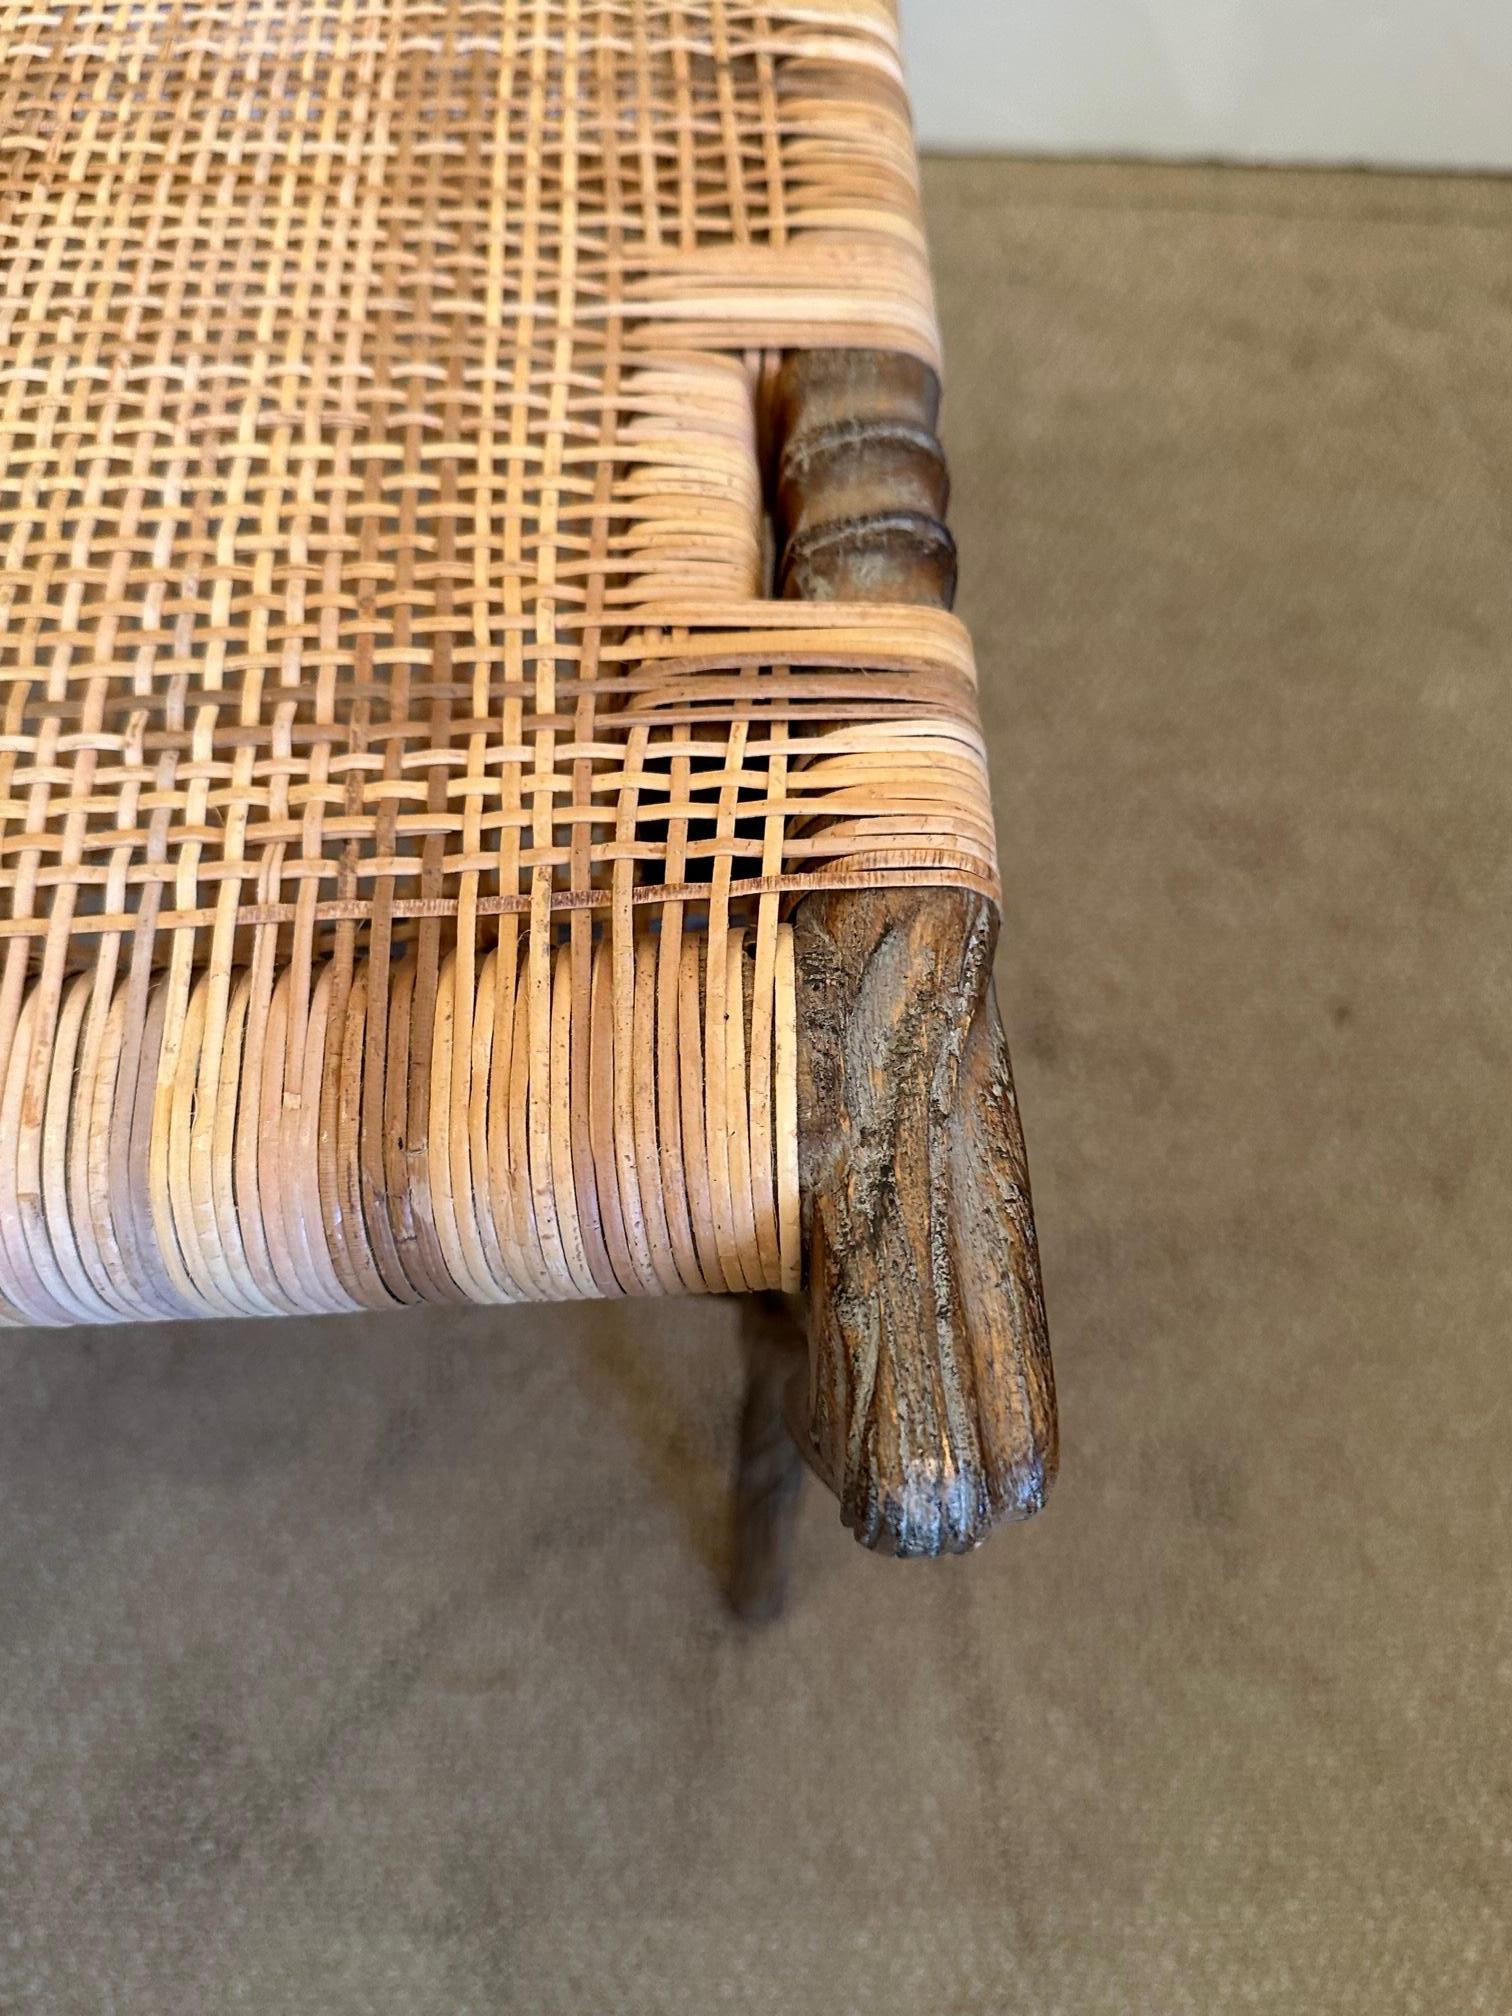 Superb Organic Modern Faux Twig and Woven Rattan Chair In Good Condition For Sale In Hopewell, NJ